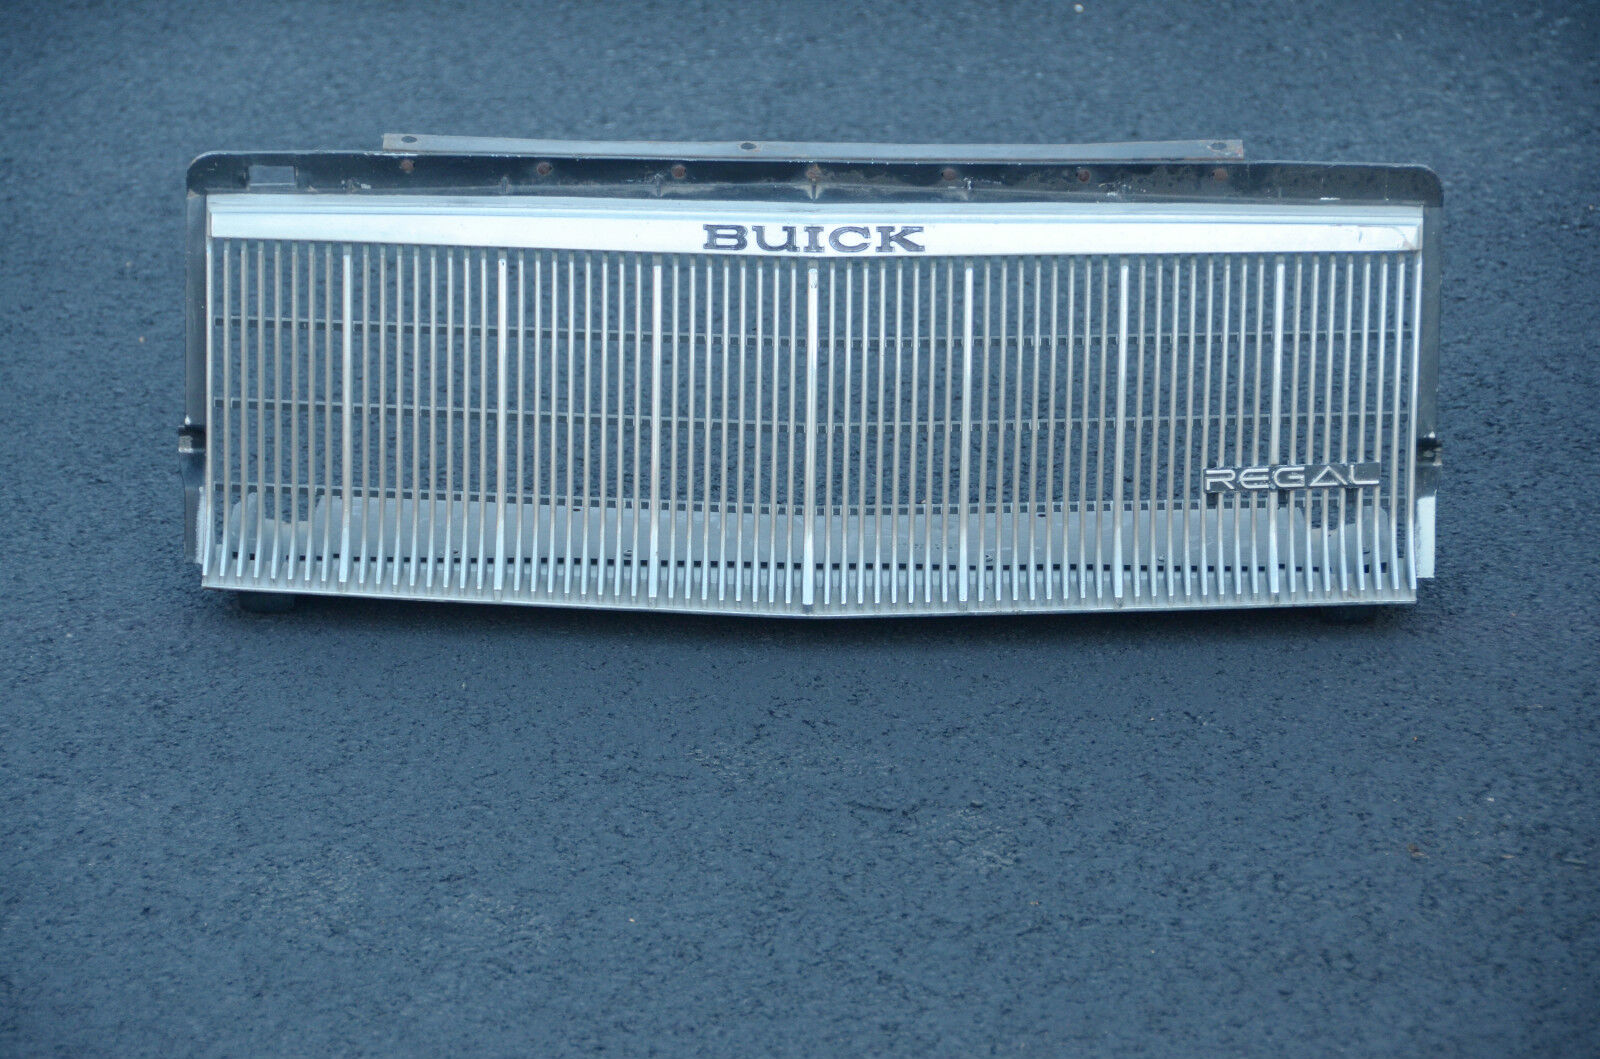 Grille 84-87 Buick Regal Grill Radiator Chrome Plastic Front Header Panel 85 86